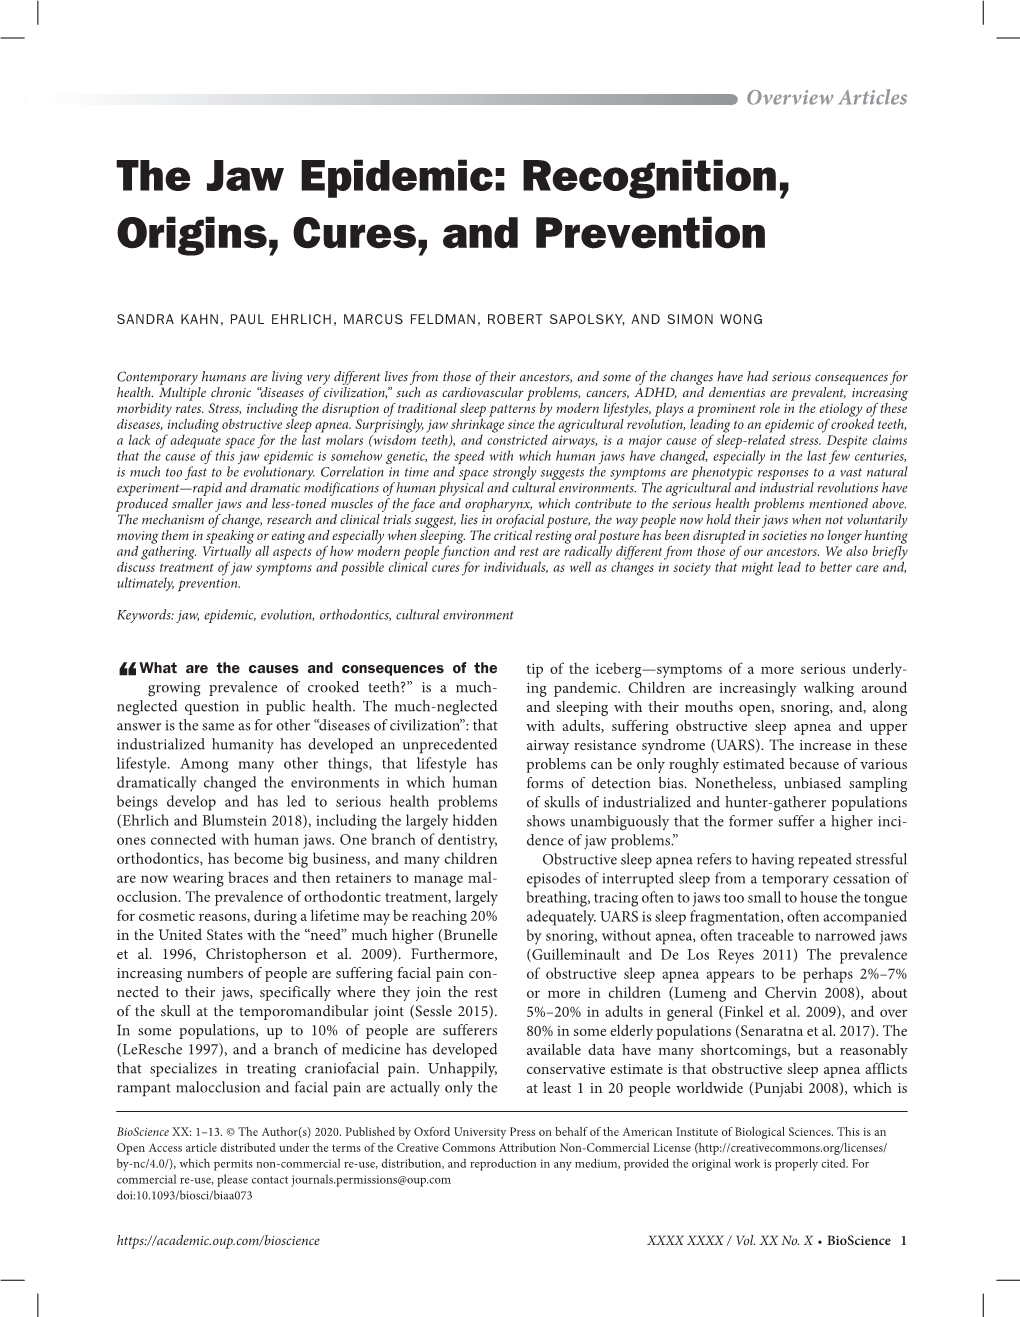 The Jaw Epidemic: Recognition, Origins, Cures, and Prevention